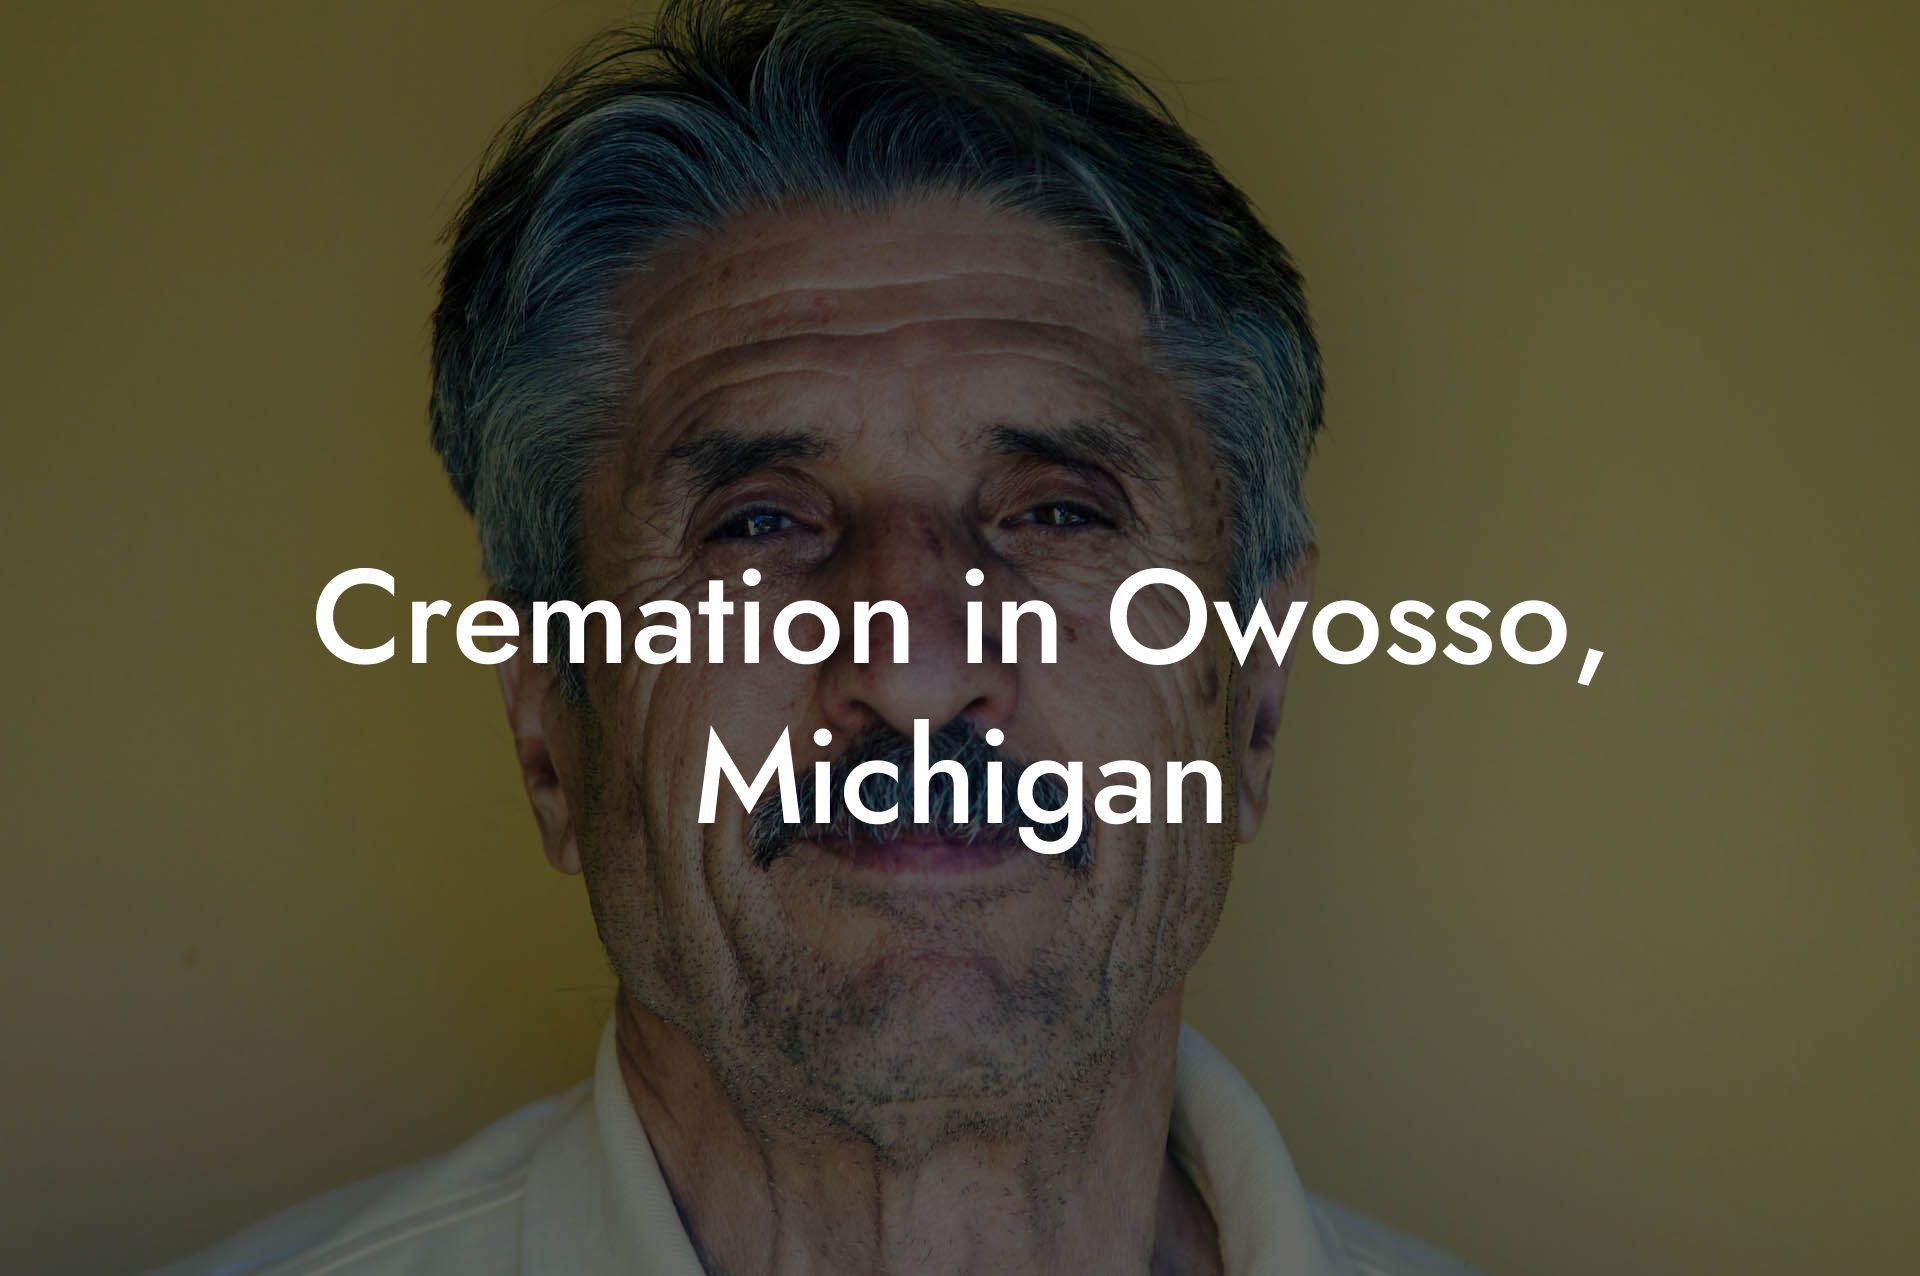 Cremation in Owosso, Michigan